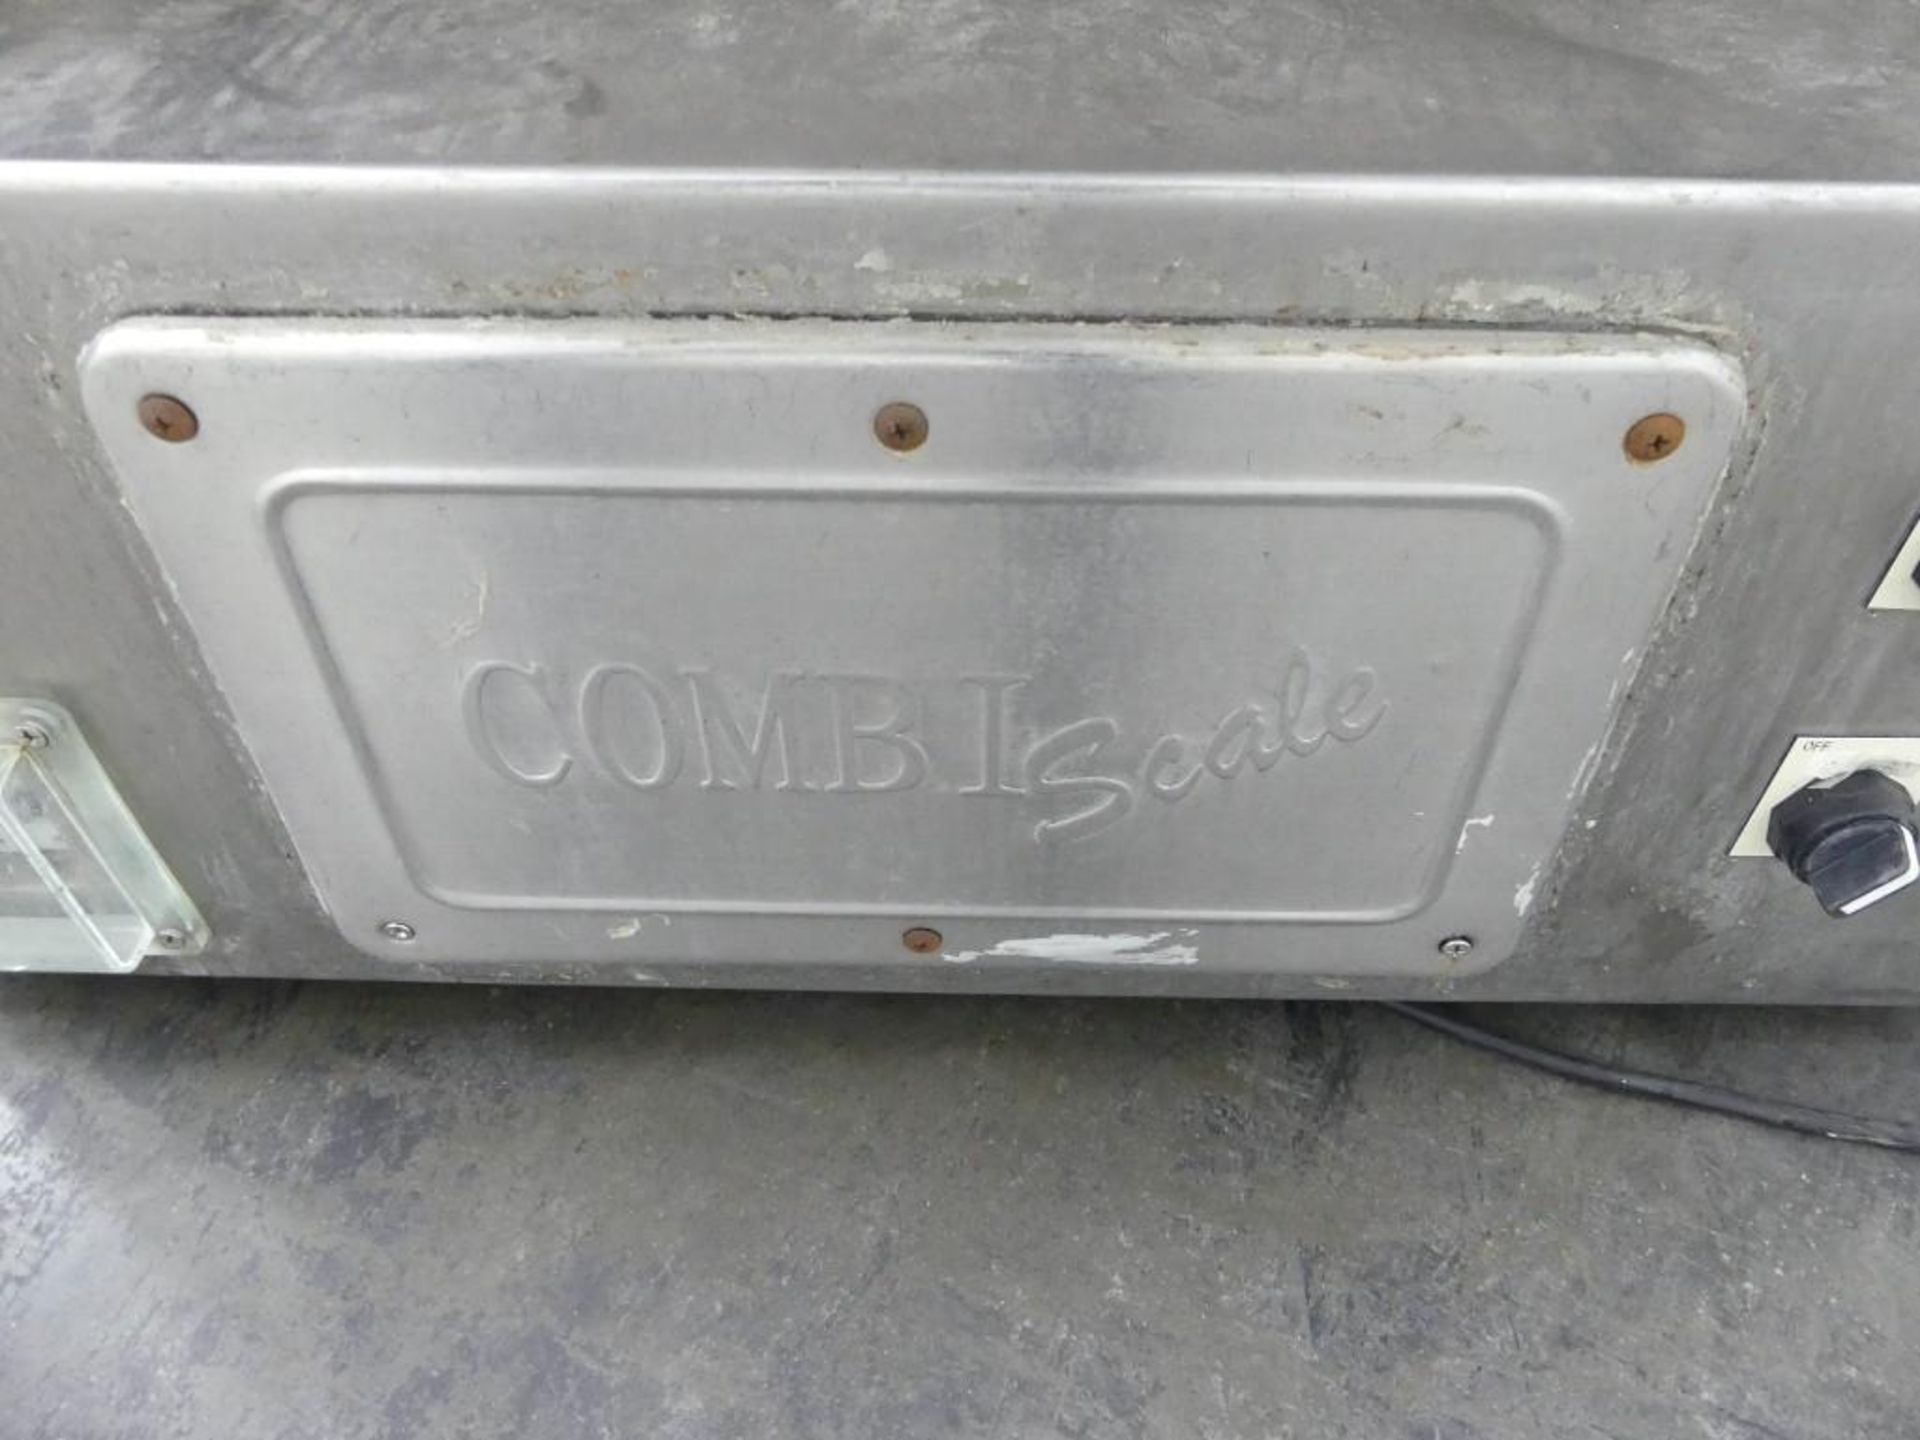 Combi 14 Head Dimpled Bucket Combination Scale - Image 6 of 10